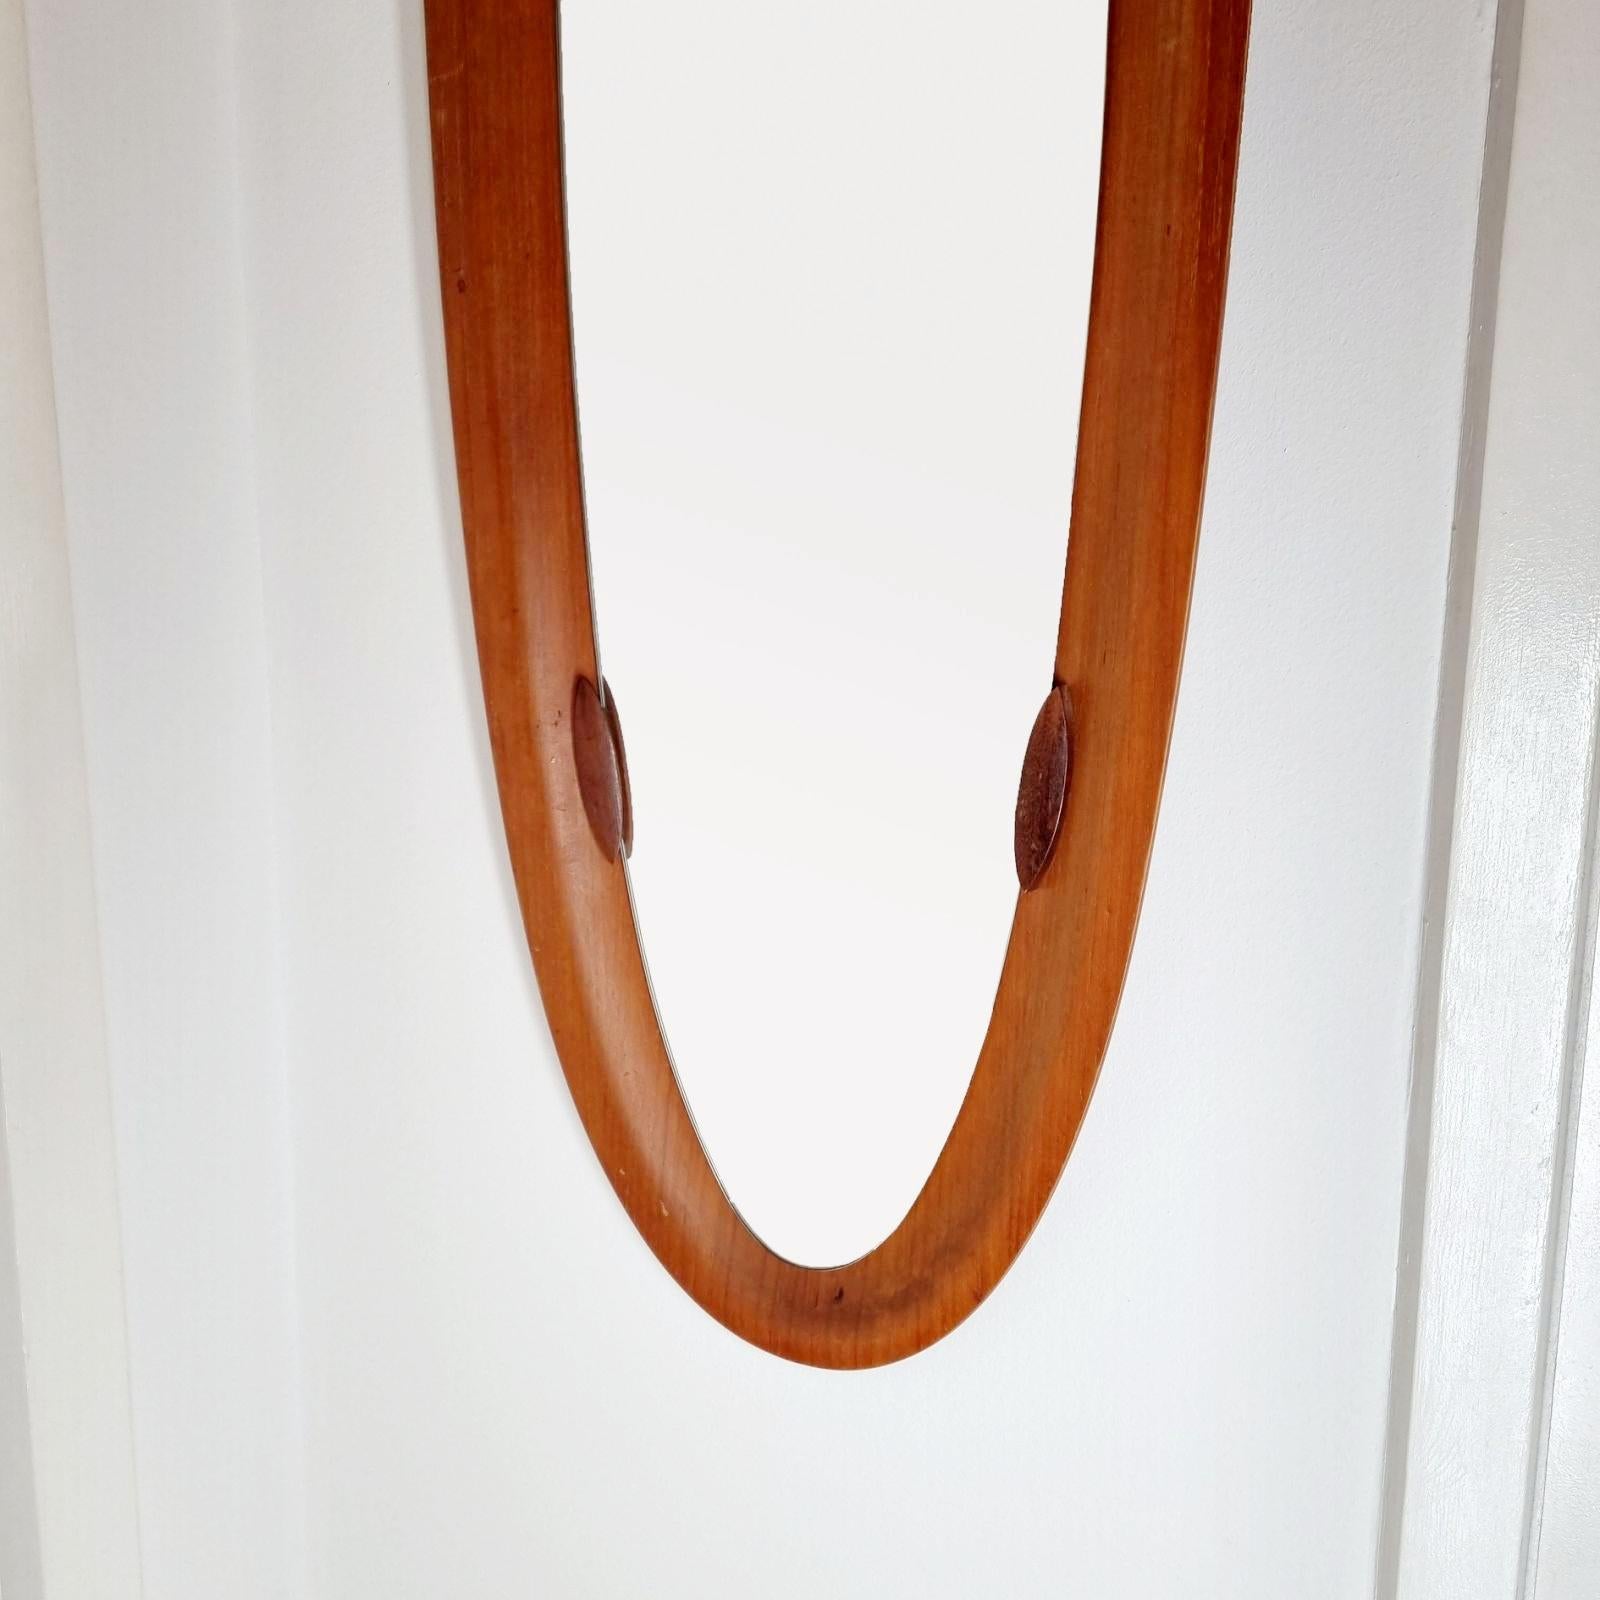 Mid-Century Oval Teak Wall Mirror, Designed by Campo e Graffi, Italy 60s For Sale 4